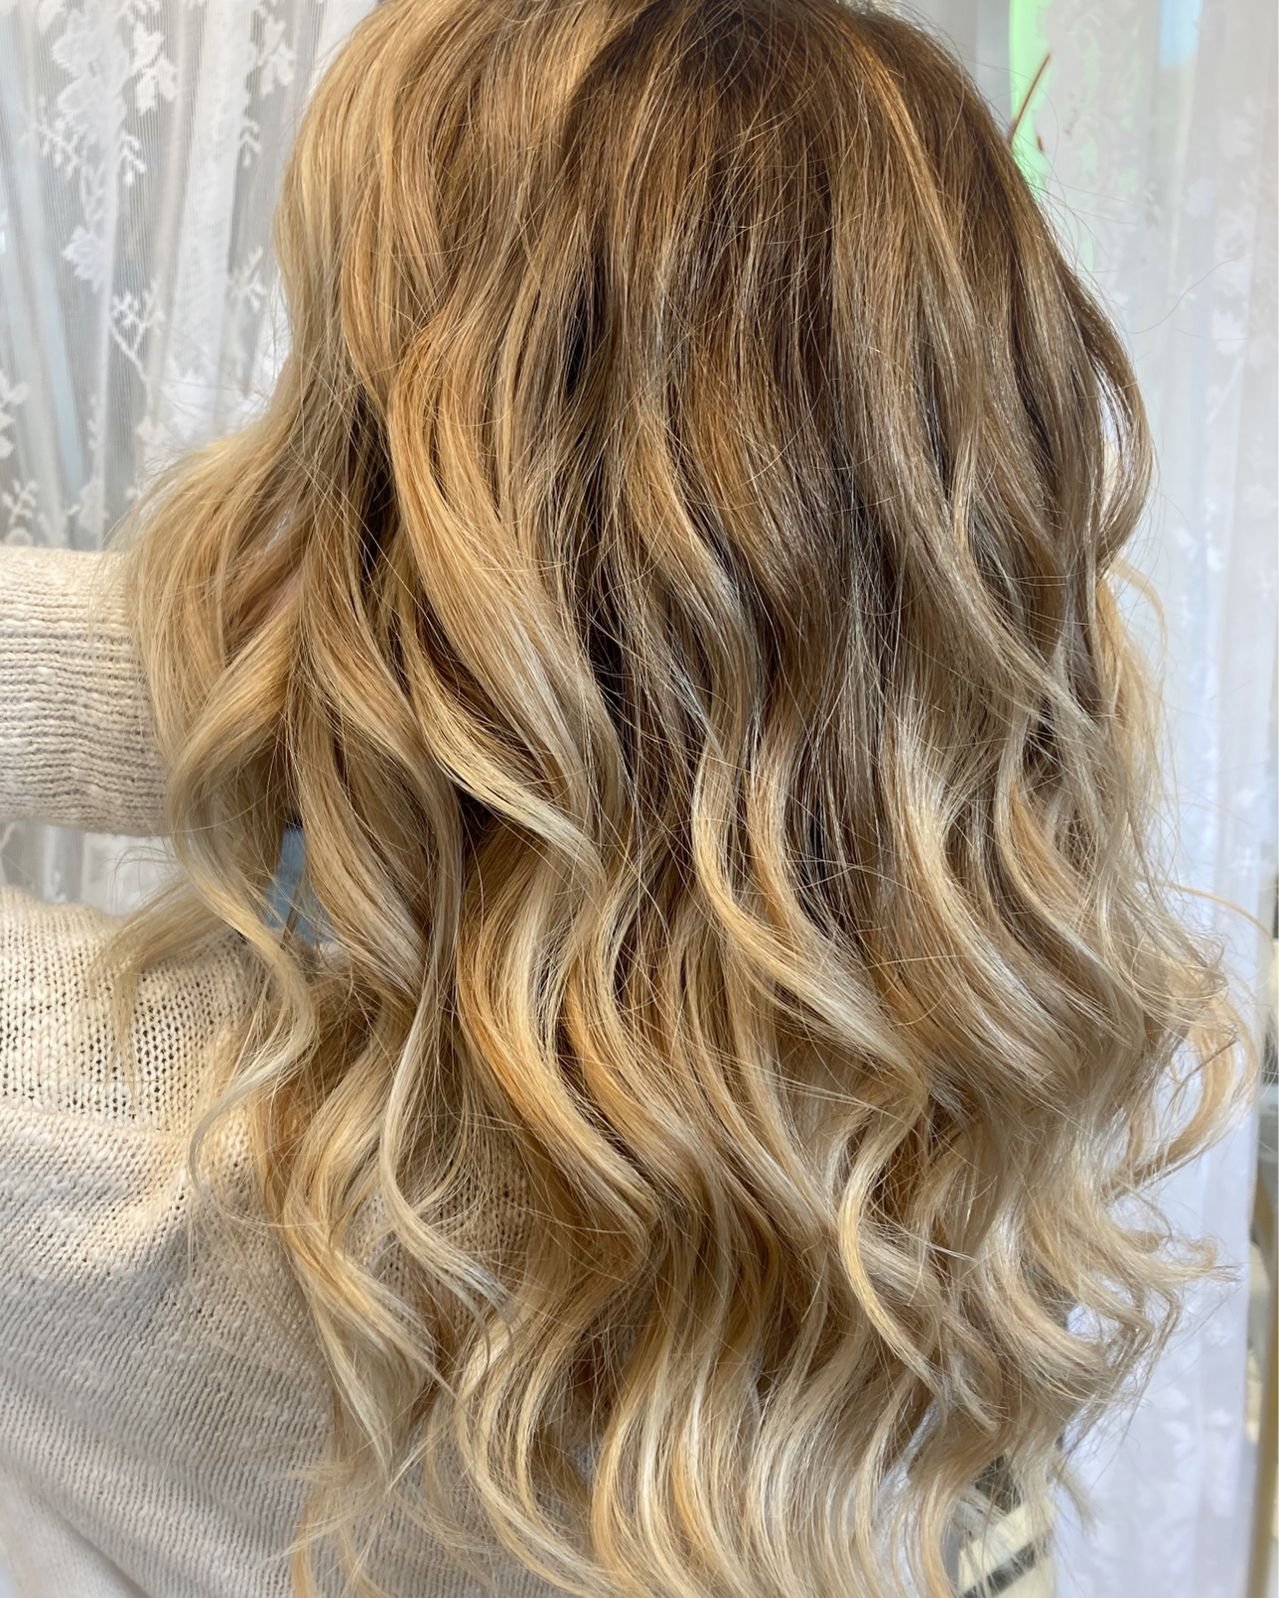 Summer is right around the corner! Is your hair summer ready??? 

If not, no worries! Book your appointment by visiting the website. Not sure what to book?? Fill out the digital consultation form on the new guest page. 

#wausau #wausauwi  #stevenspo